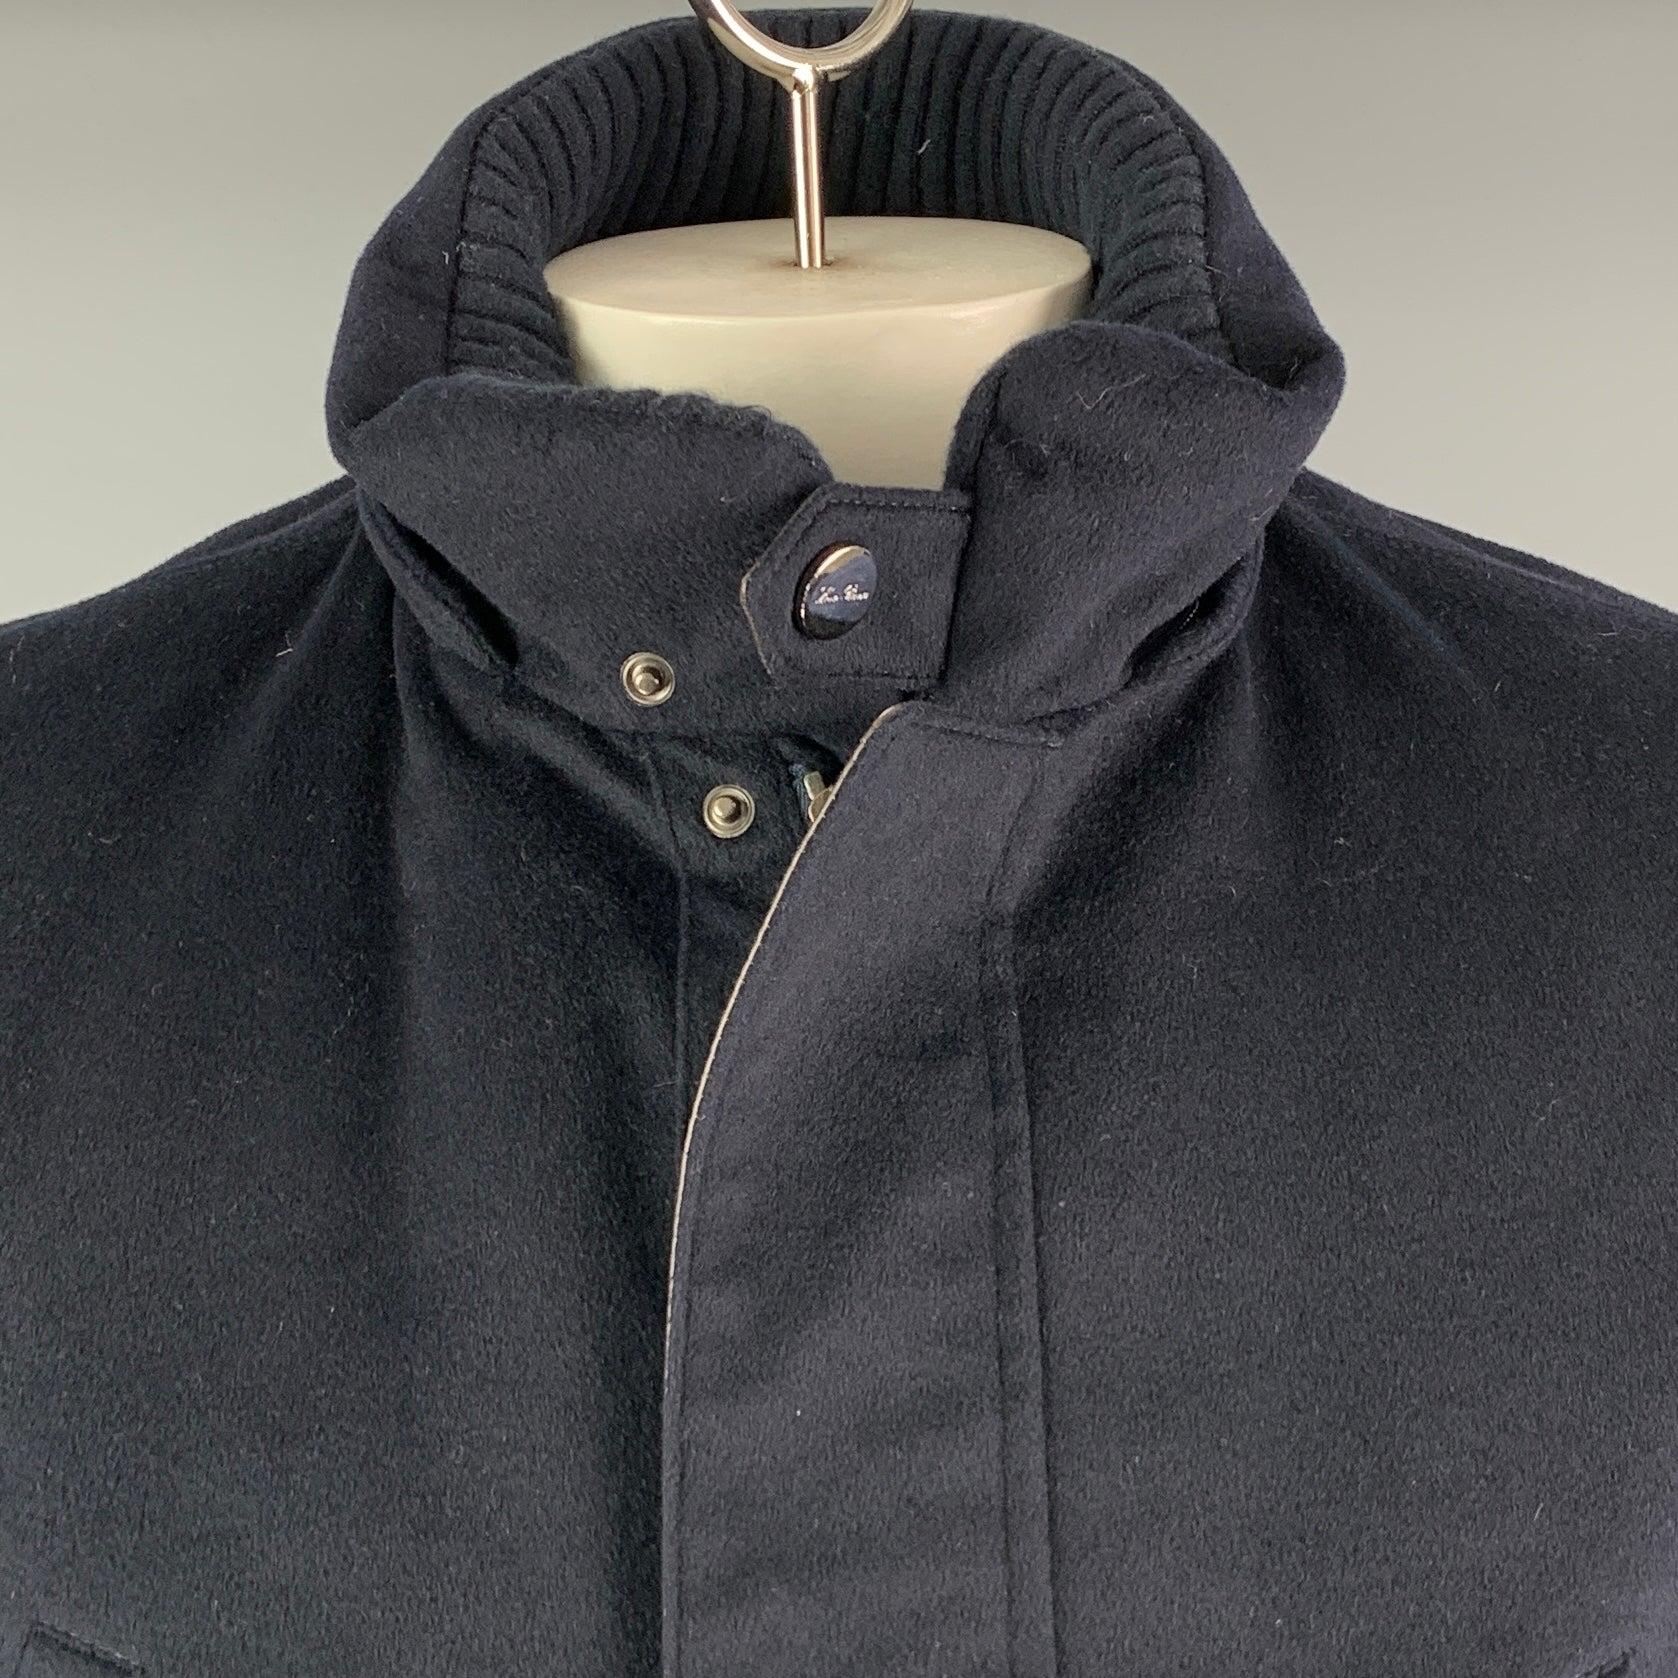 LORO PIANA jacket
in a
navy cashmere fabric featuring detachable hood, brown leather trim and drawstring pull details, and zip & snaps closure. Made in Italy.Very Good Pre-Owned Condition. Minor signs of wear on snaps. 

Marked:   L 

Measurements: